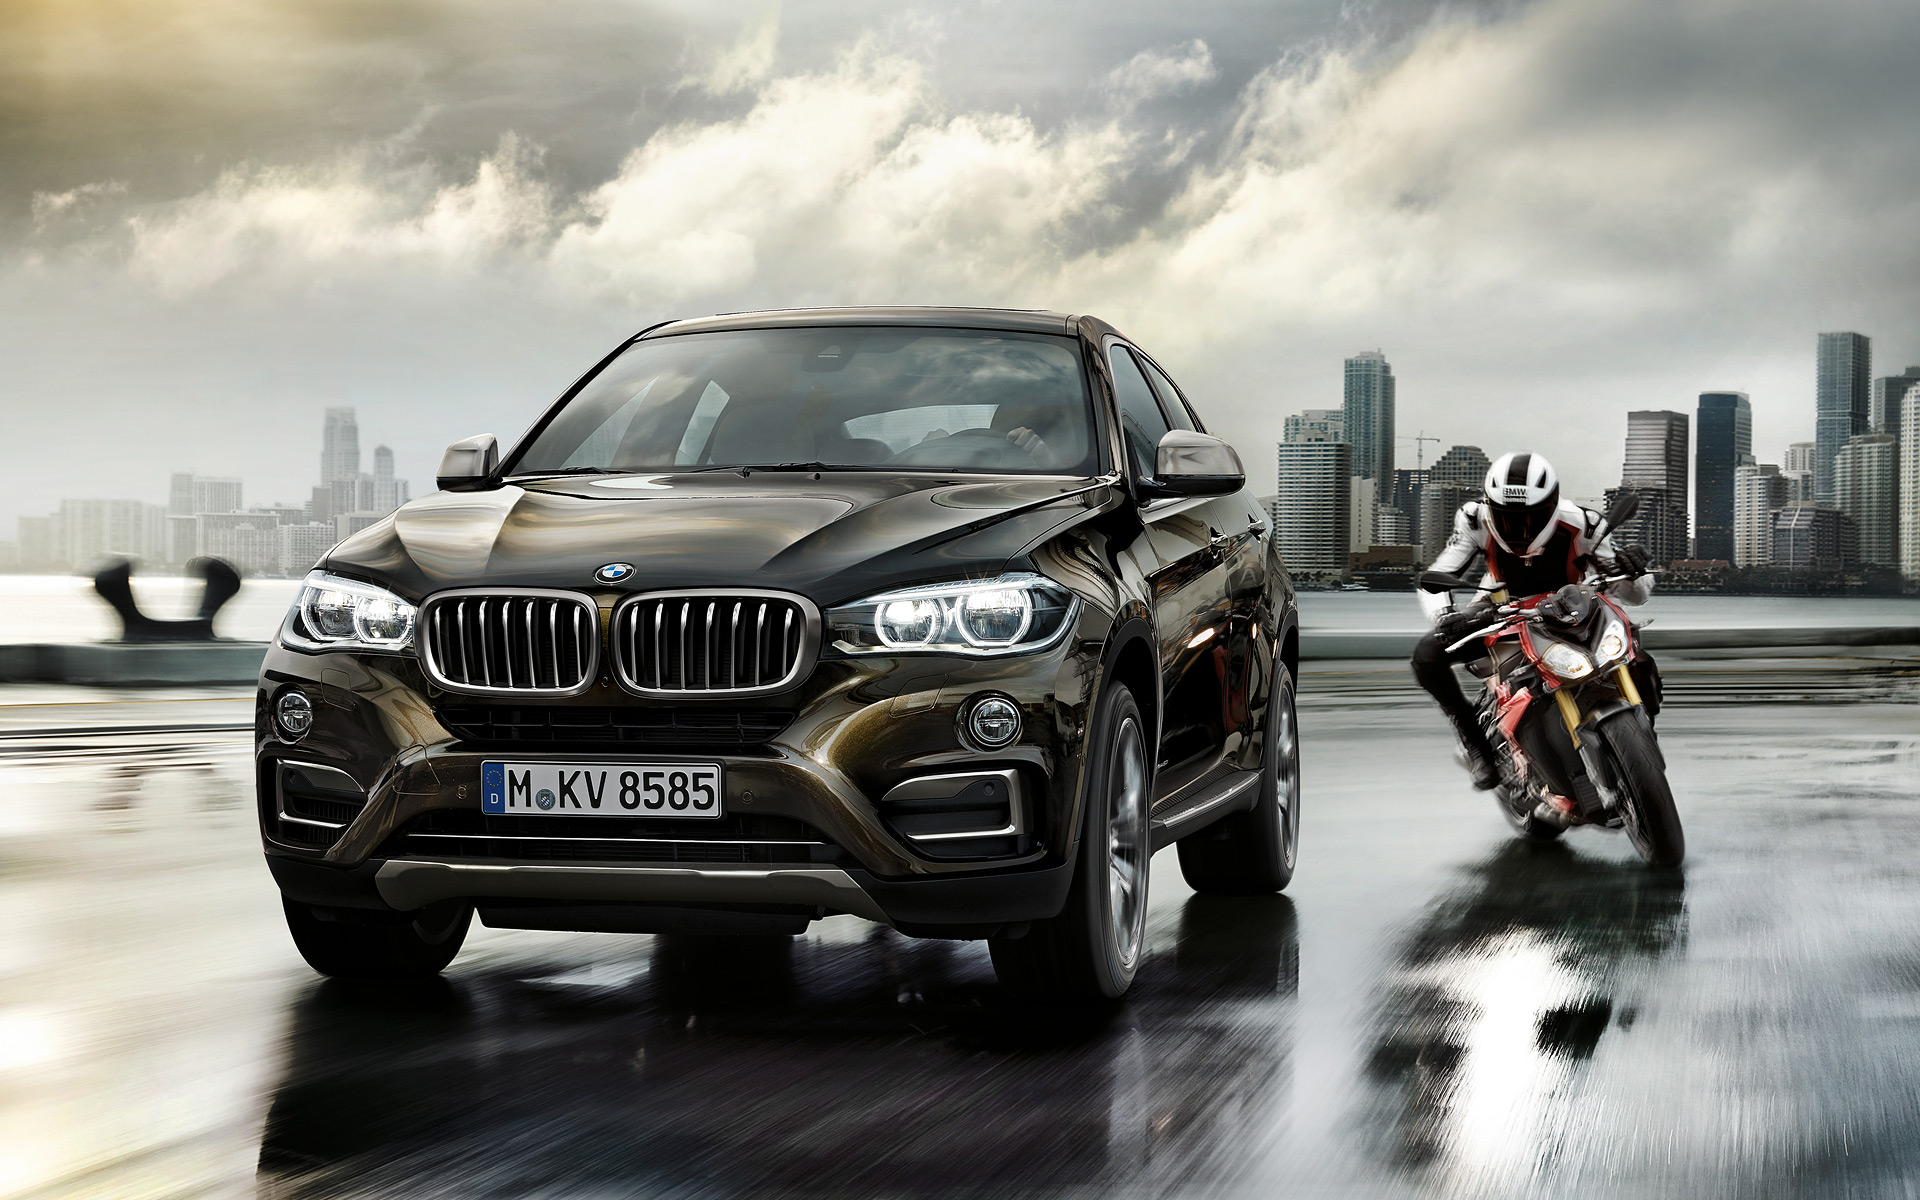  BMW X6 Wallpapers